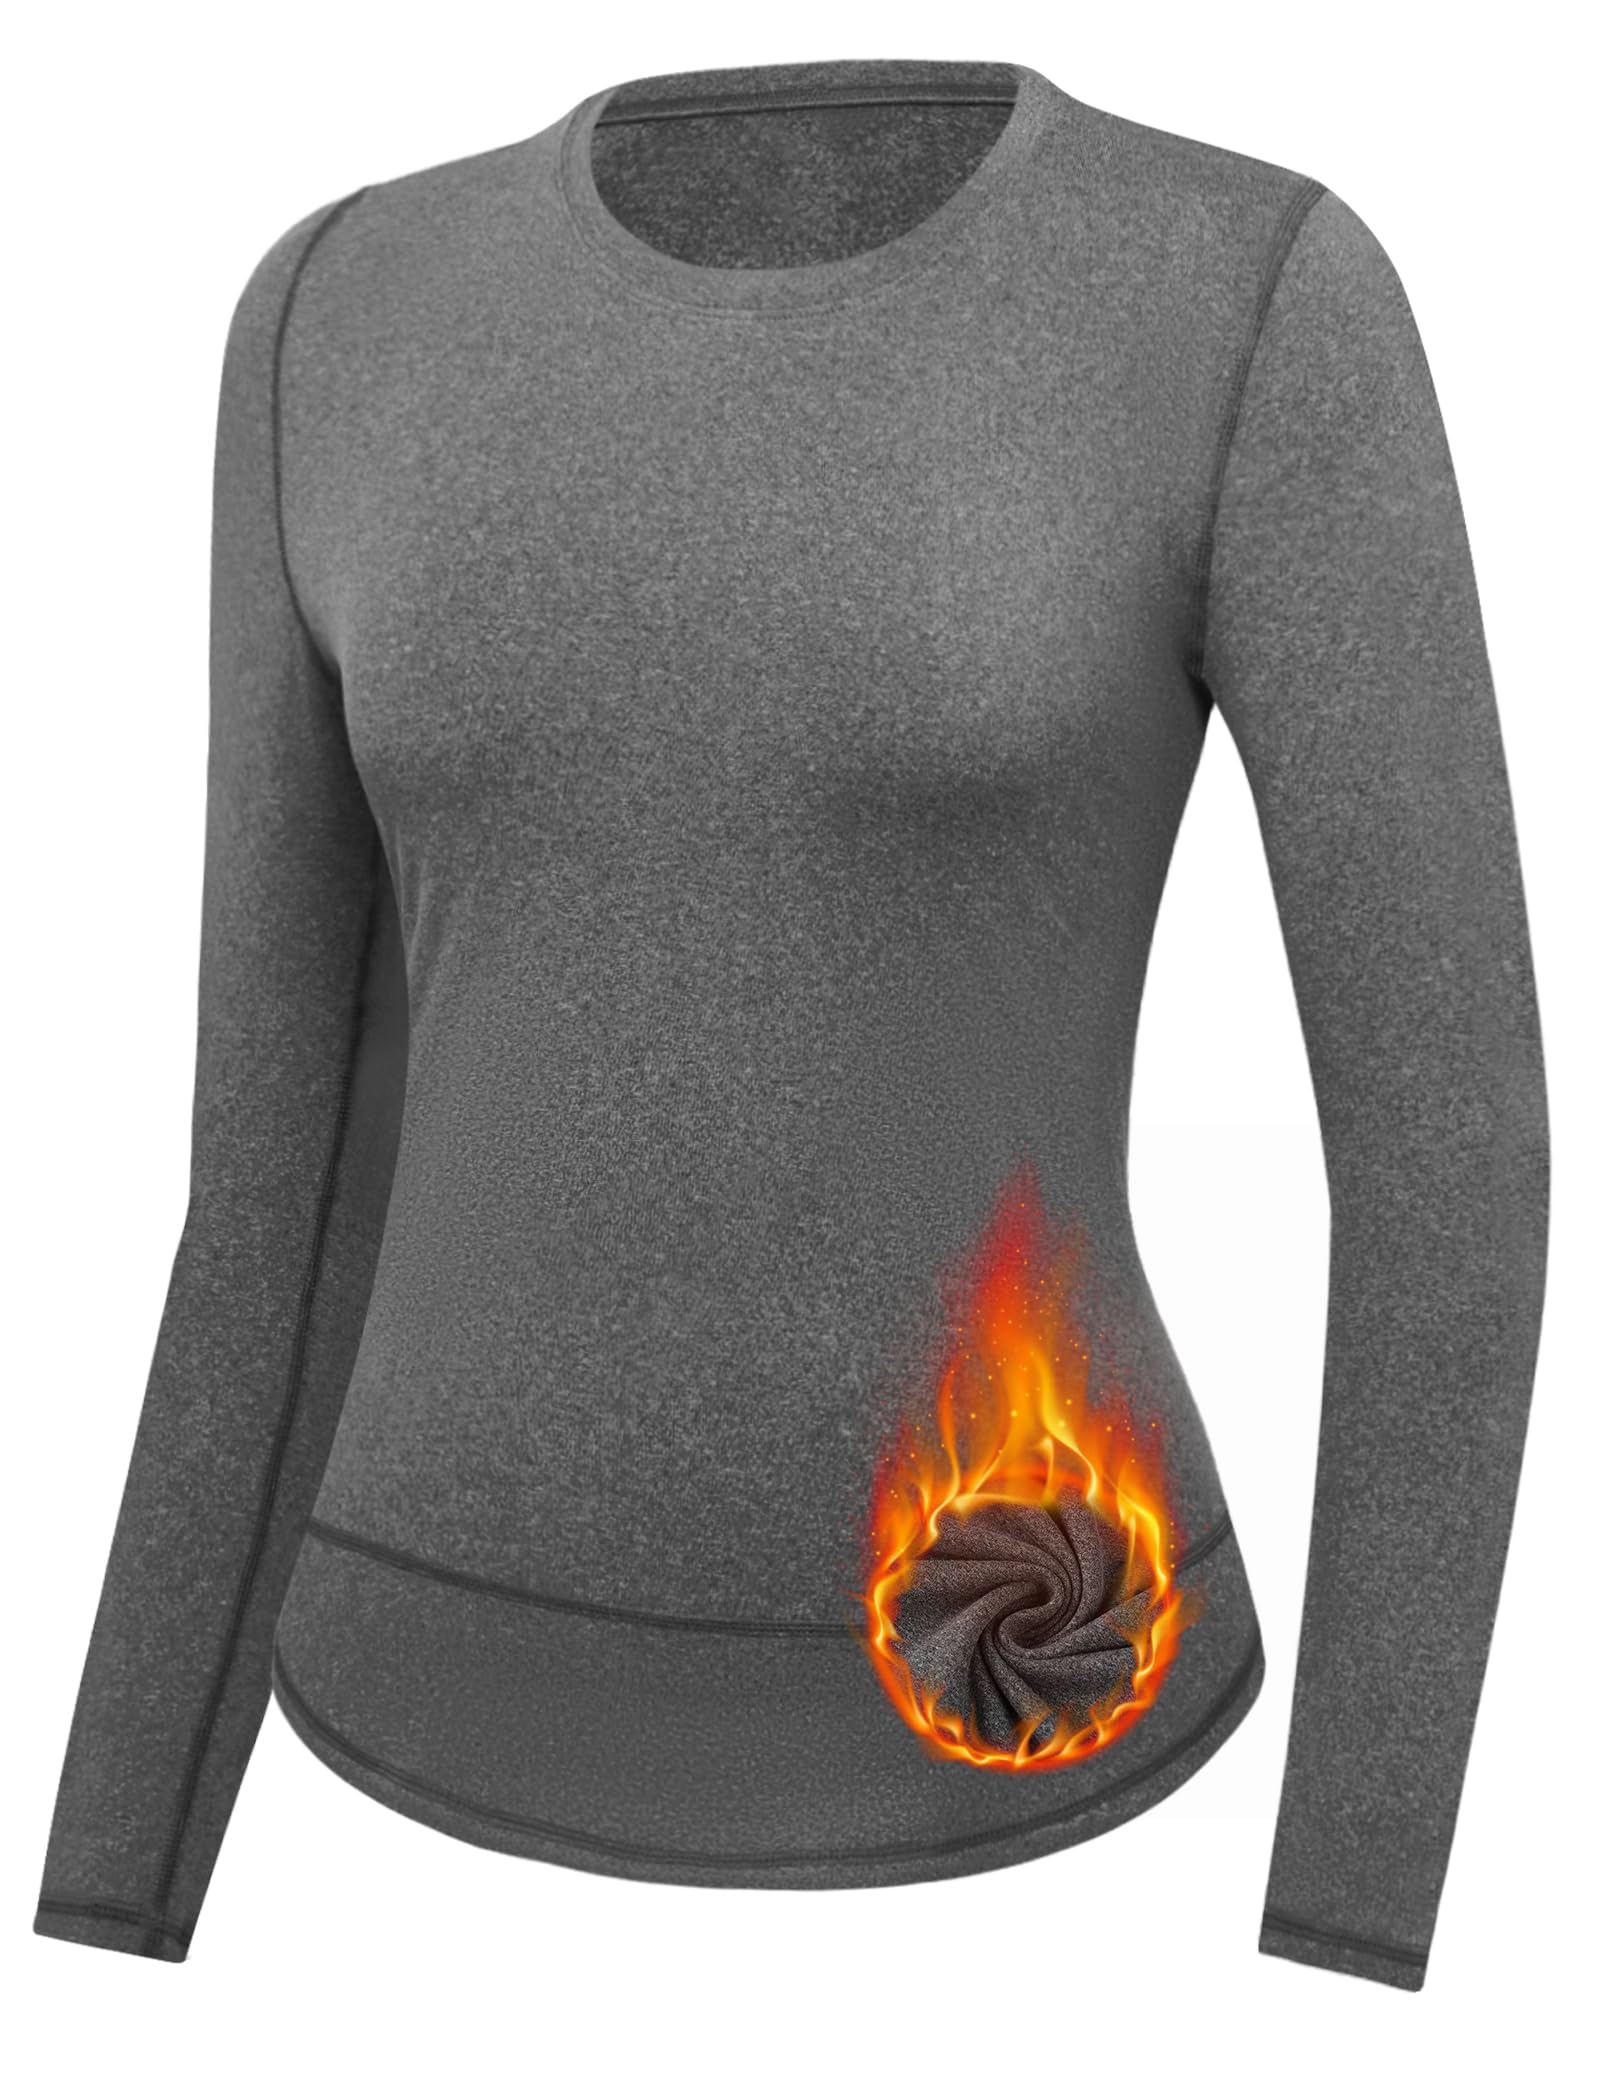 grand escompte Gyabnw sous Vetement Thermique Femme Tee